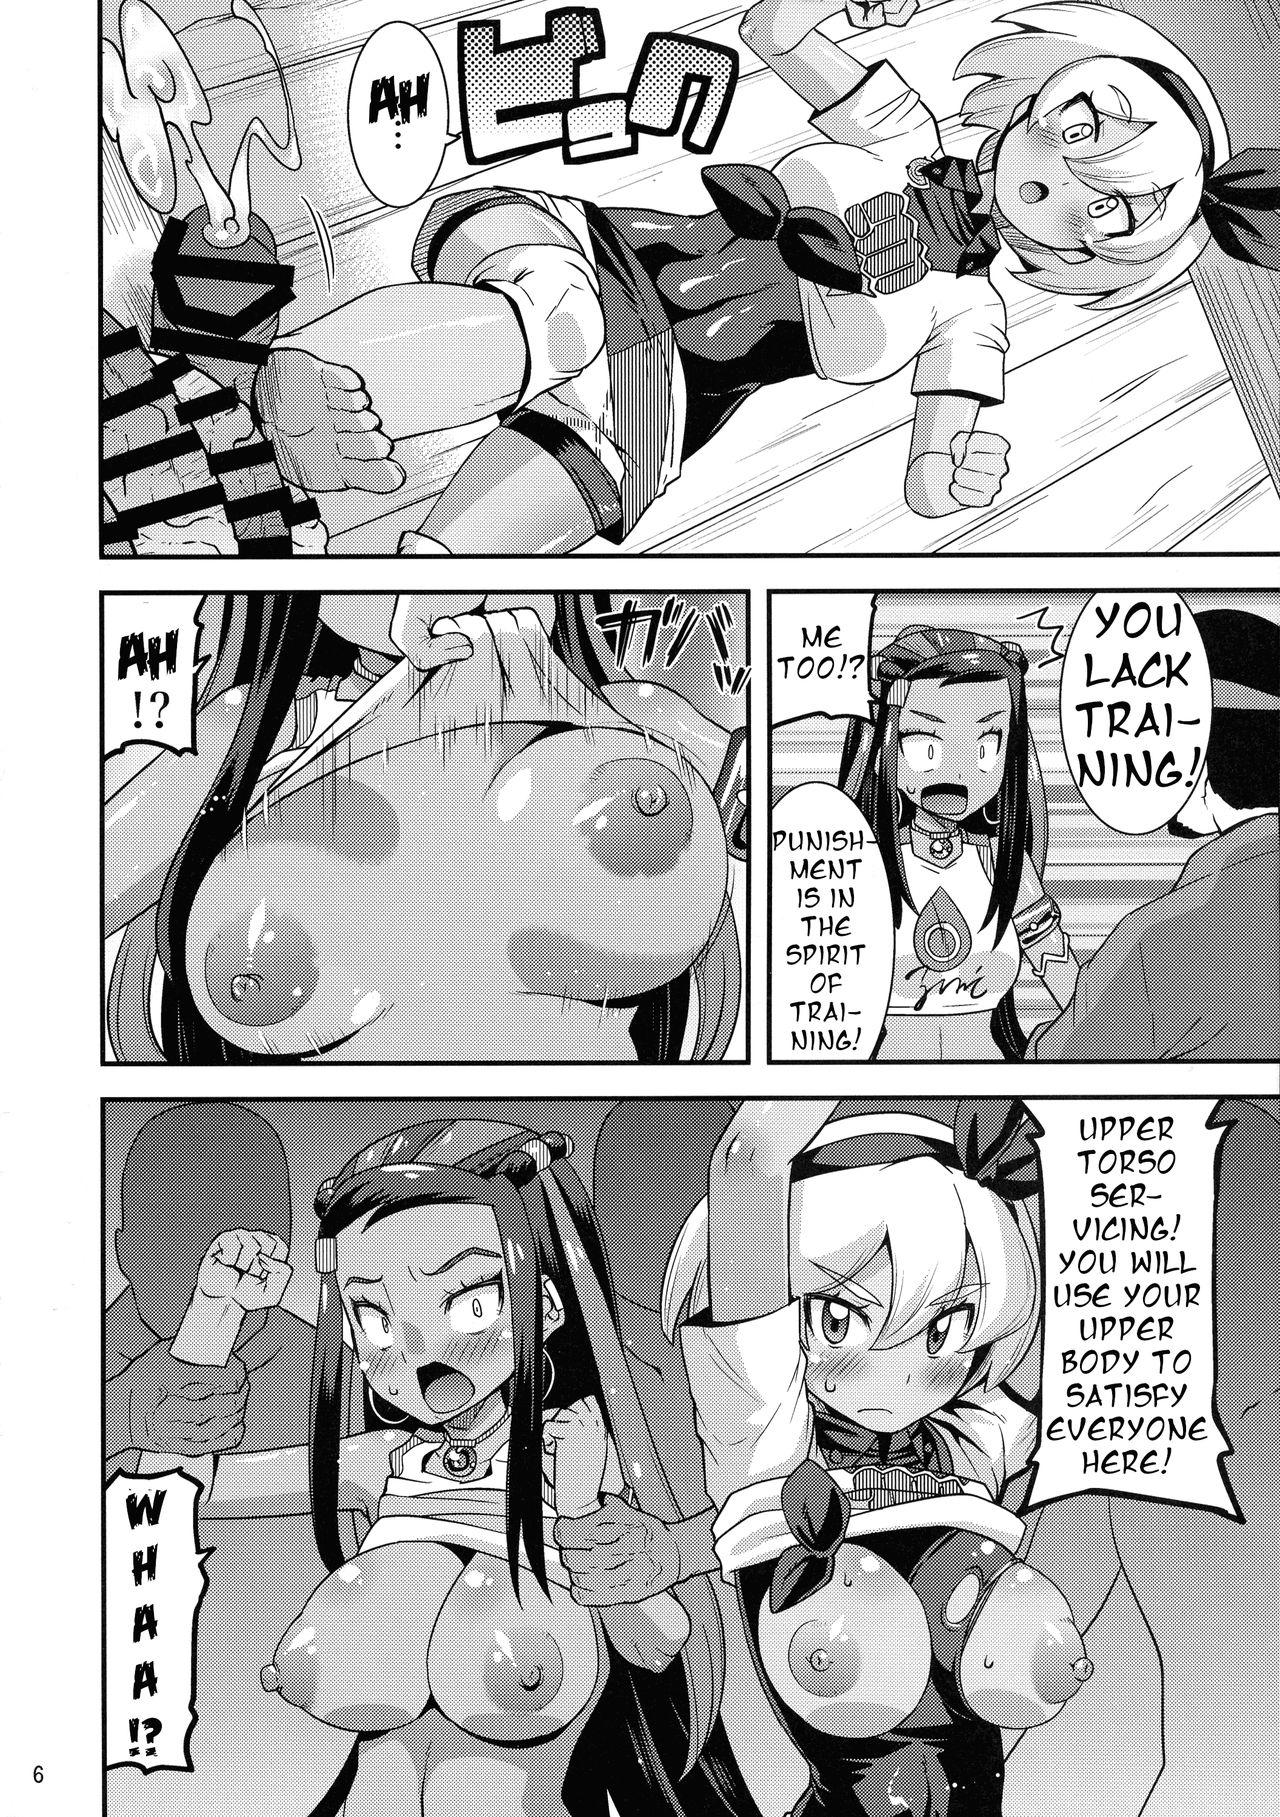 Couples Galar no Okite - Pokemon | pocket monsters Best Blowjobs - Page 6